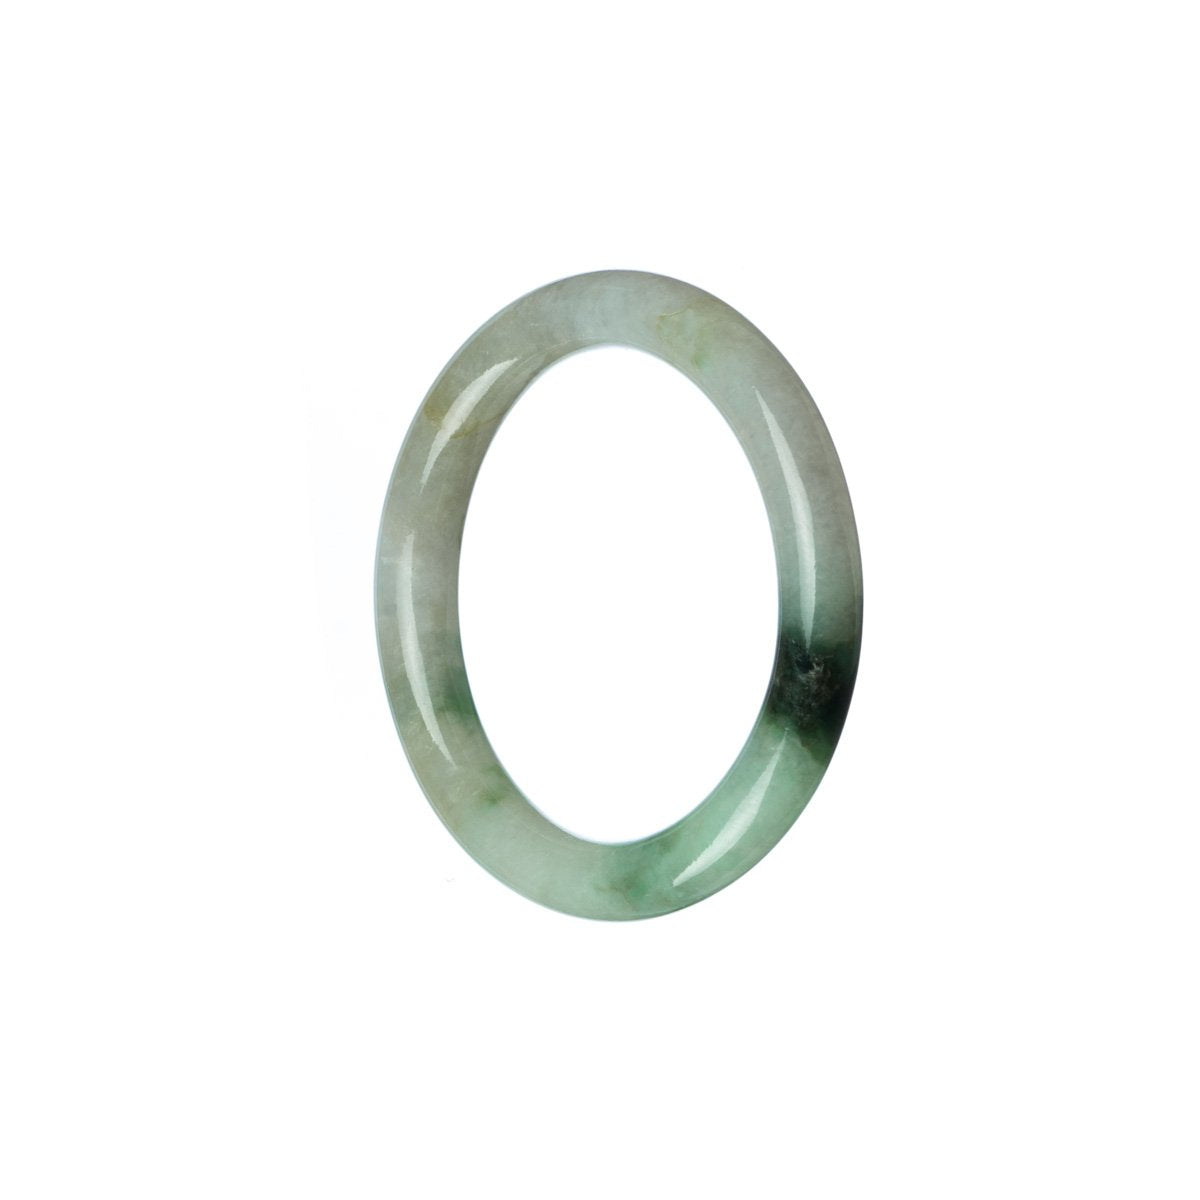 A small, round green and white jade bracelet, specially made for children. It is certified as Type A jade and is sold by MAYS GEMS.